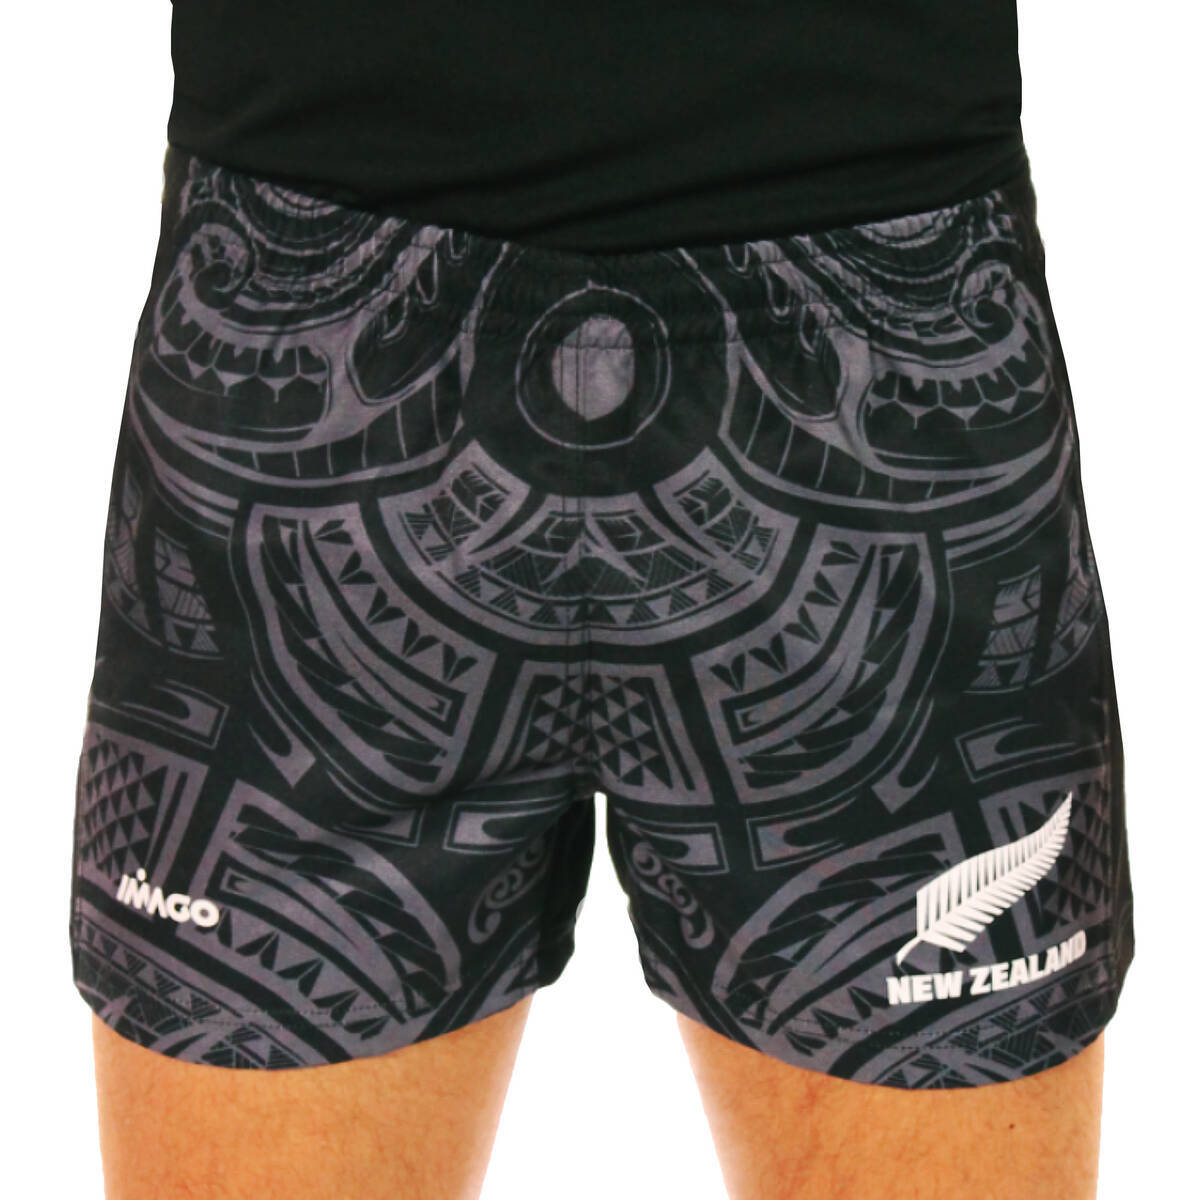 Imagen producto Short Rugby New Zealand Maori  7